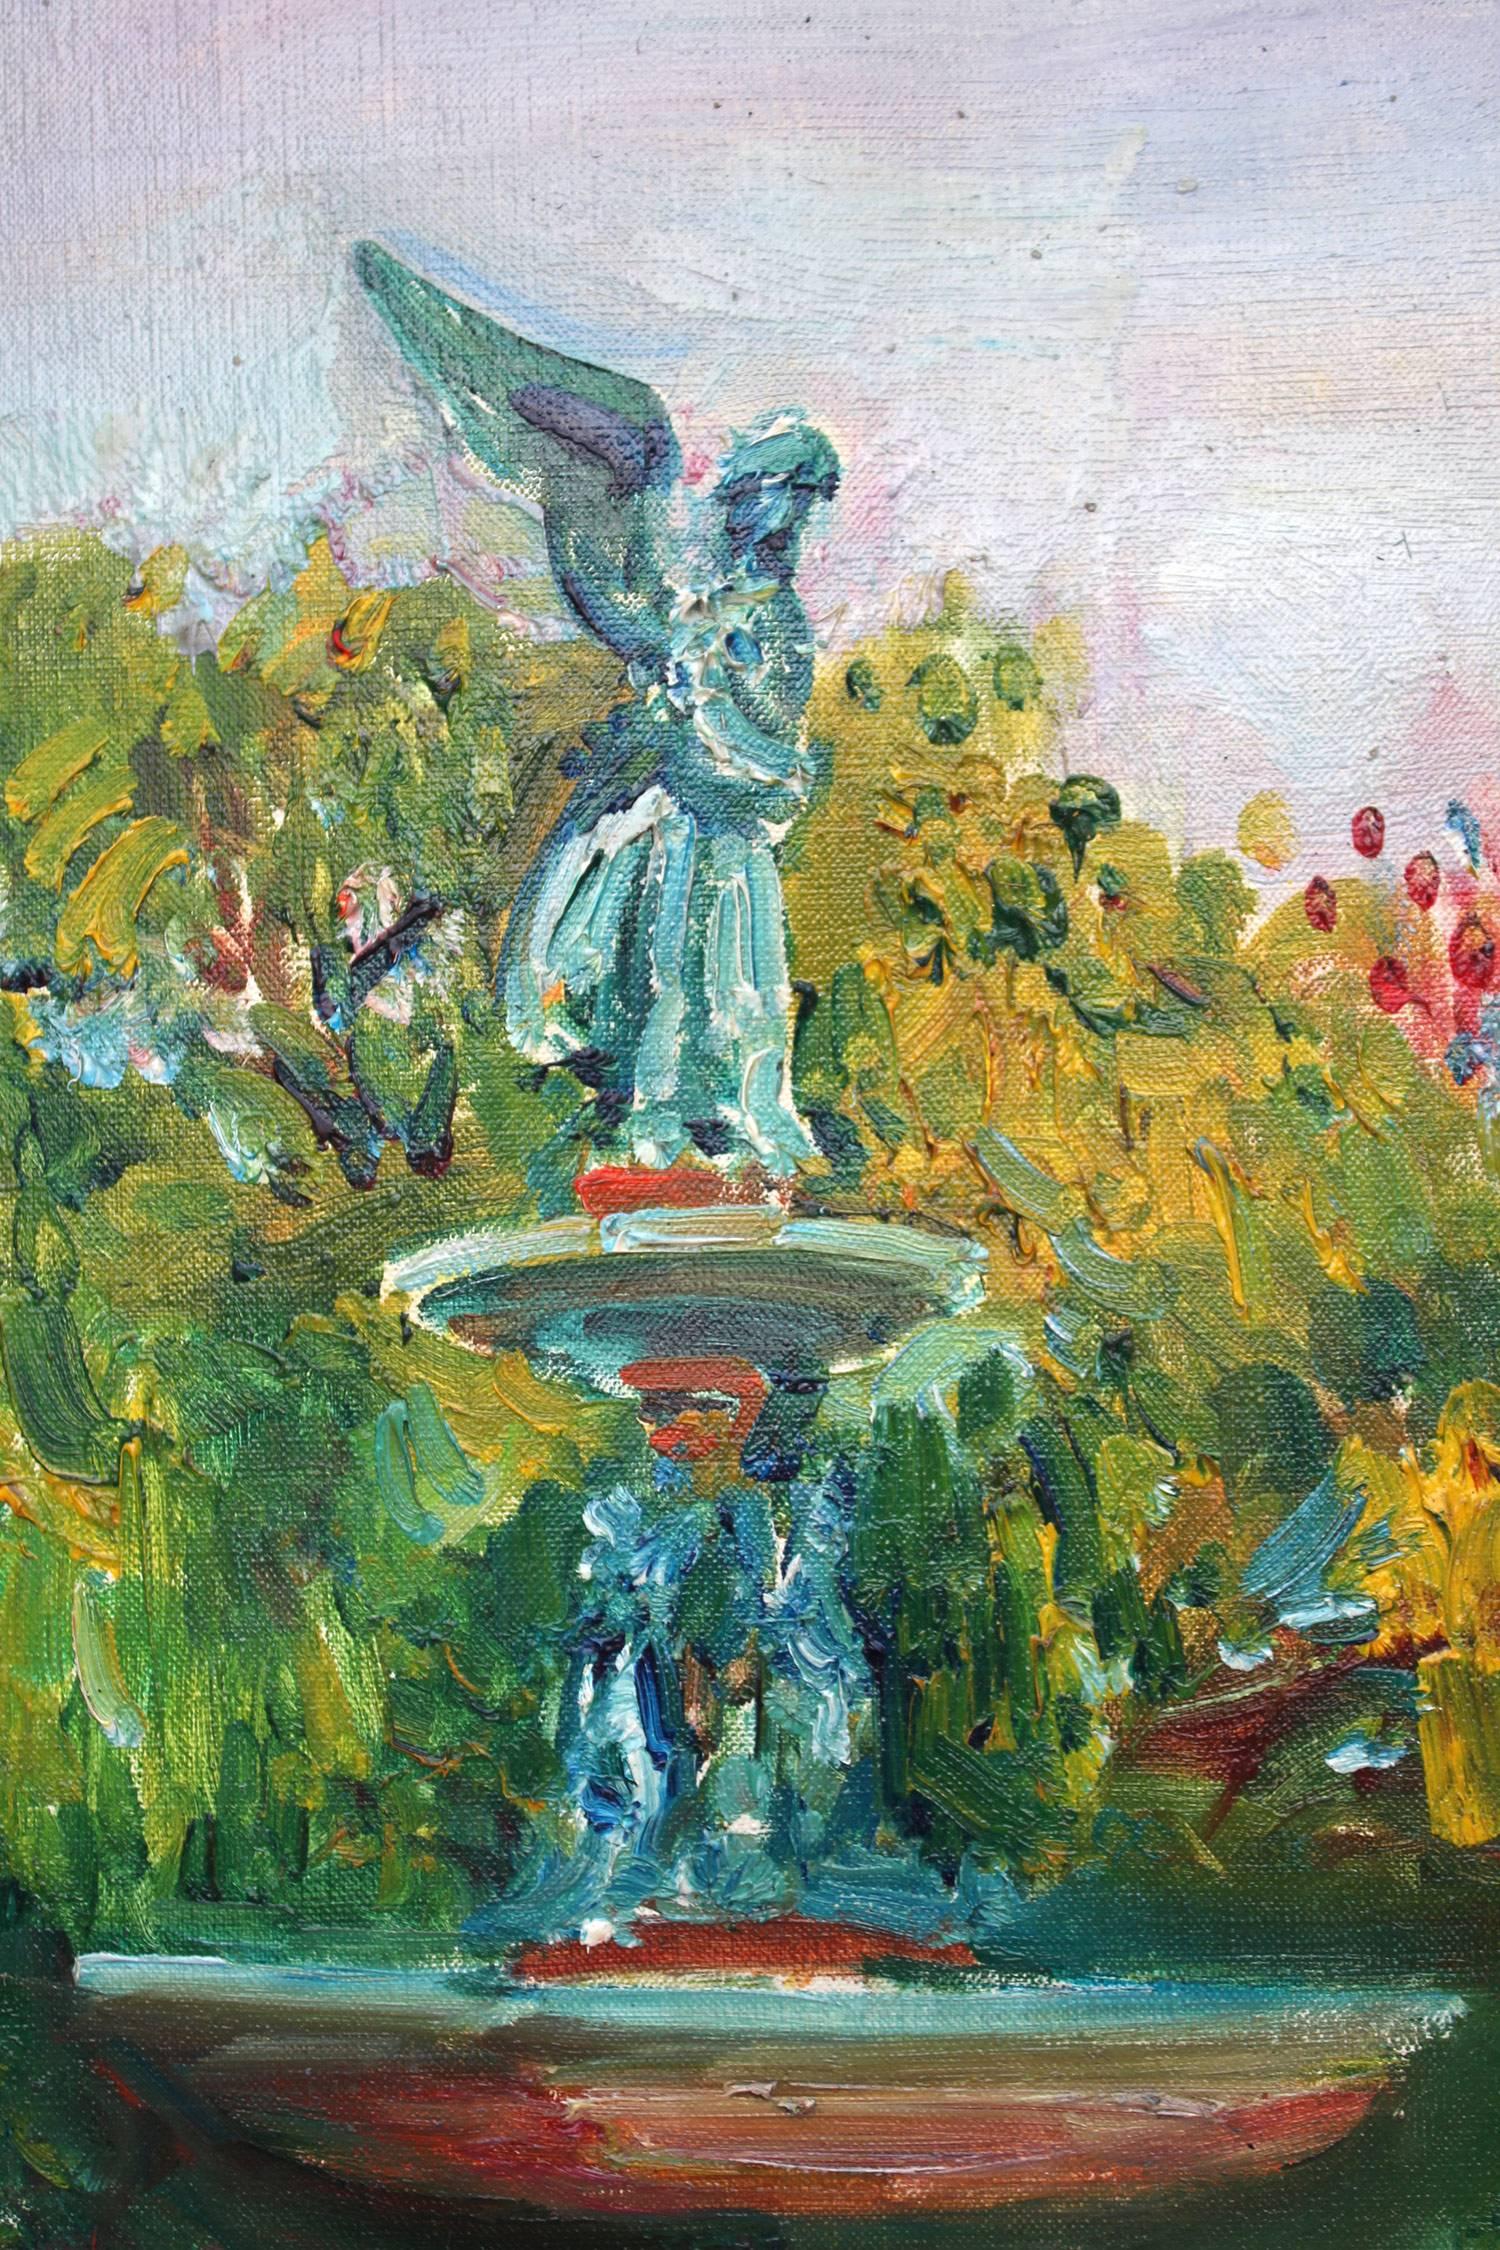 This painting depicts a whimsical scene of the dearly iconic Bethesda Fountain in New York City's Central Park. The bright colors and quick brush strokes are what make this painting so attractive and desirable. The piece is done in a highly